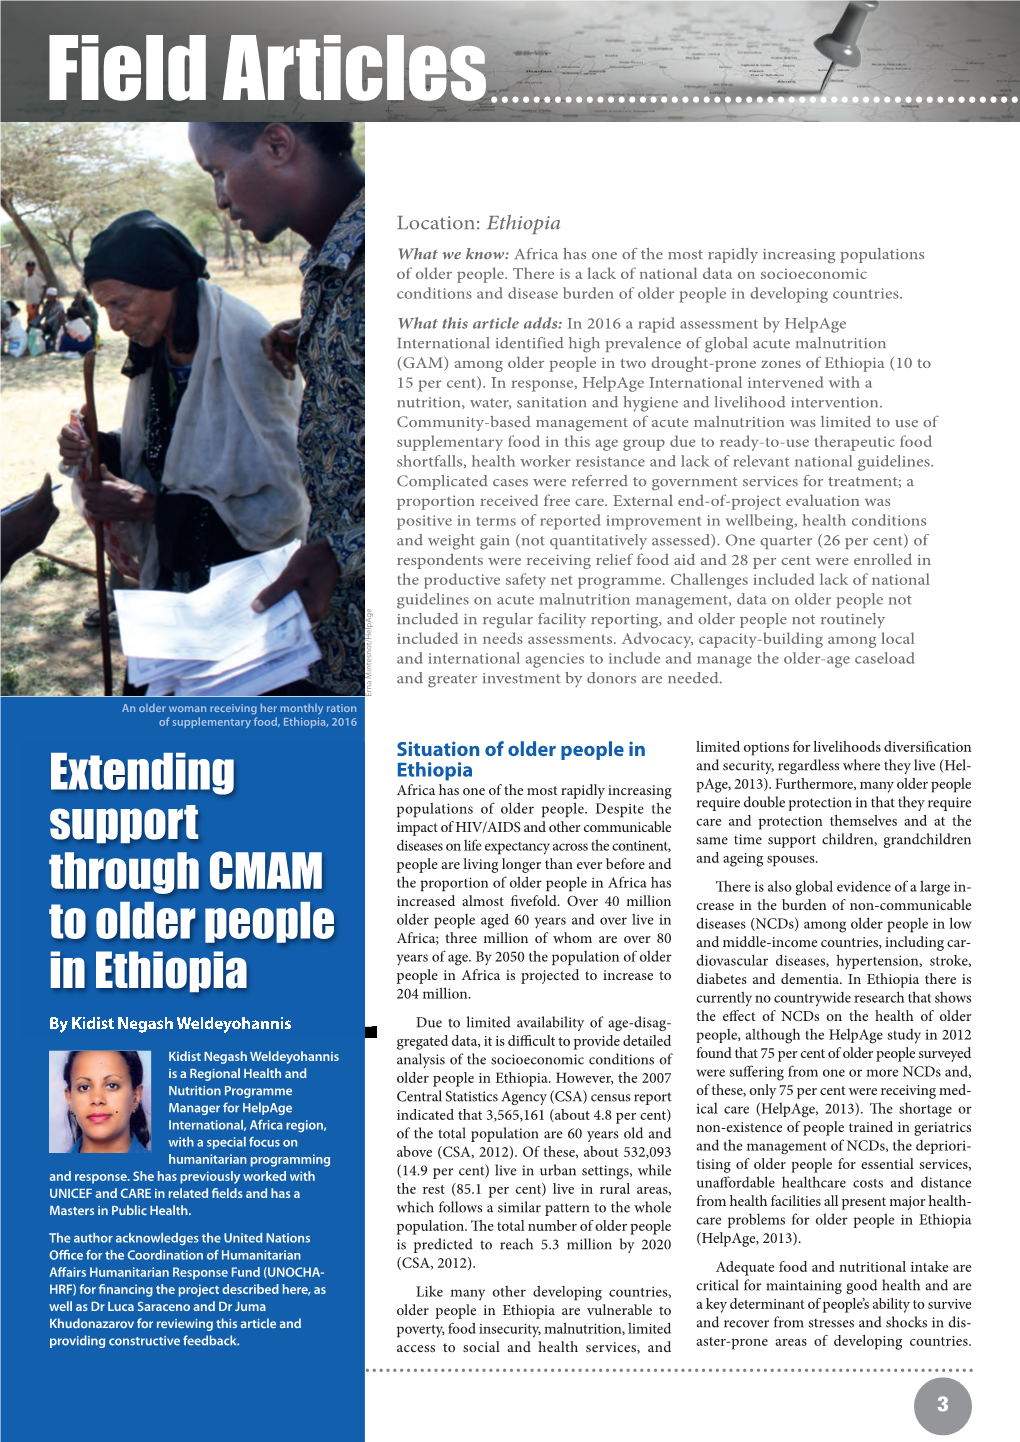 Extending Support Through CMAM to Older People in Ethiopia